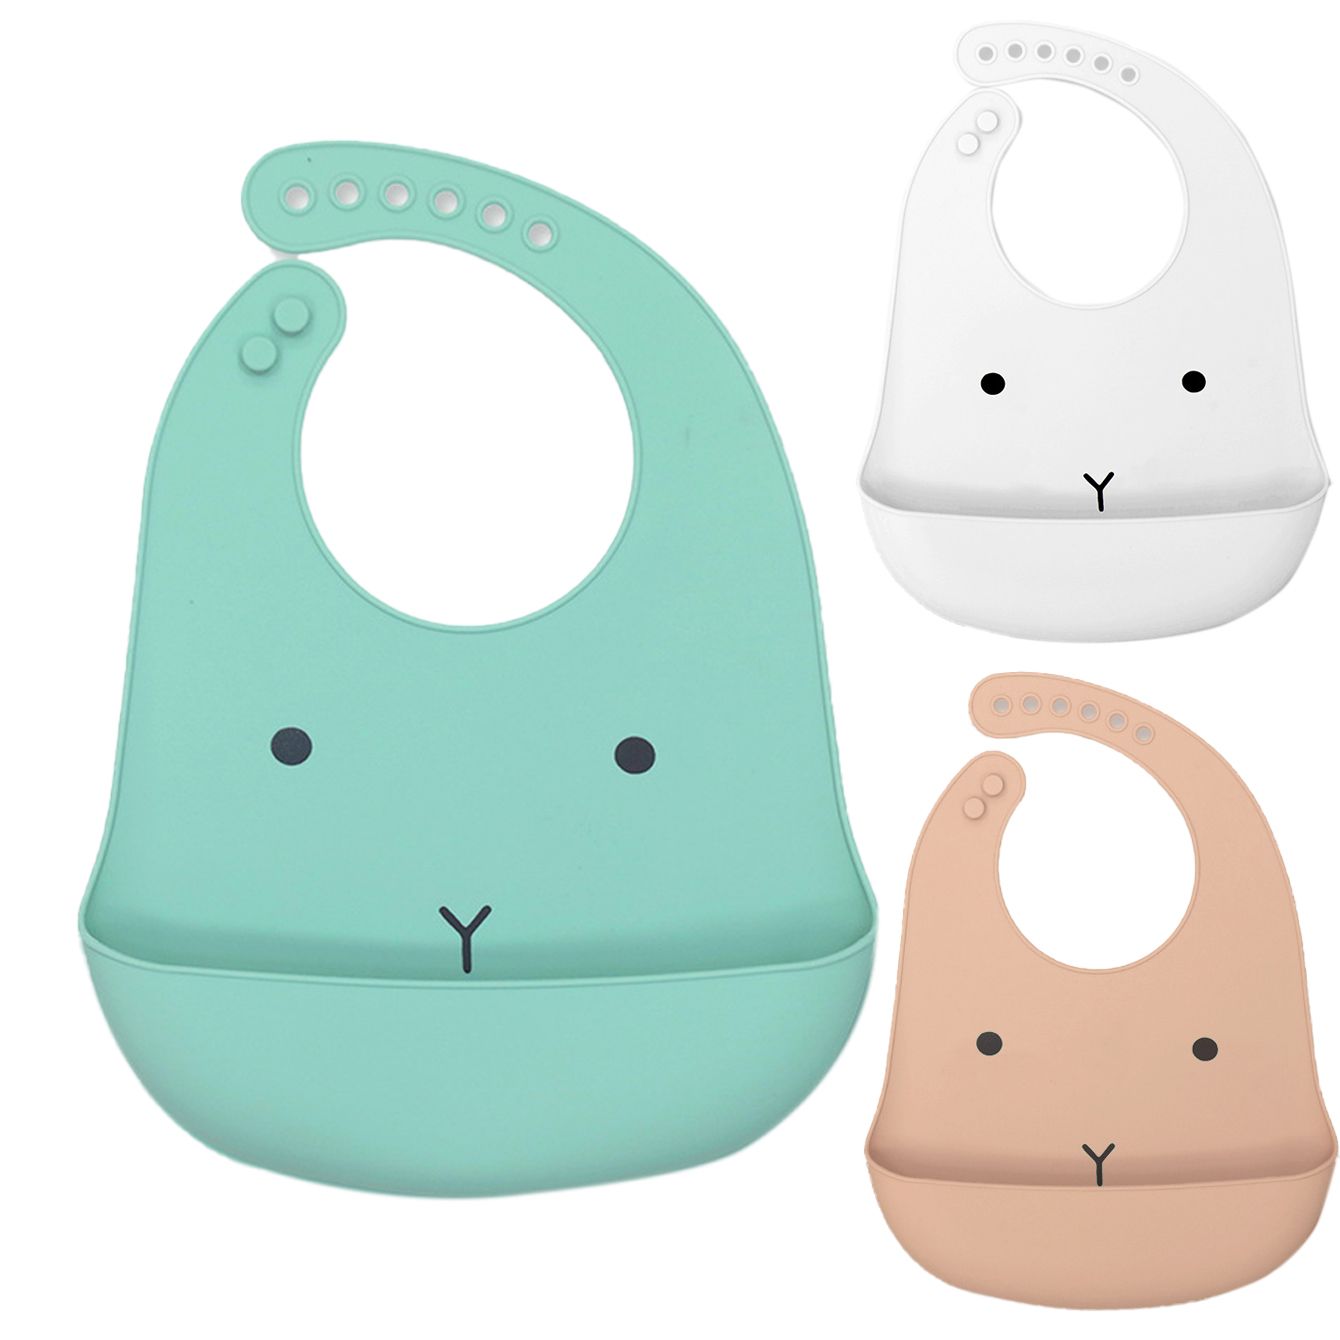 Food Grade Silicone Baby Bibs With Large Capacity  Food Catcher Pocket Waterproof Adjustable Soft Foldable Toddler Bib